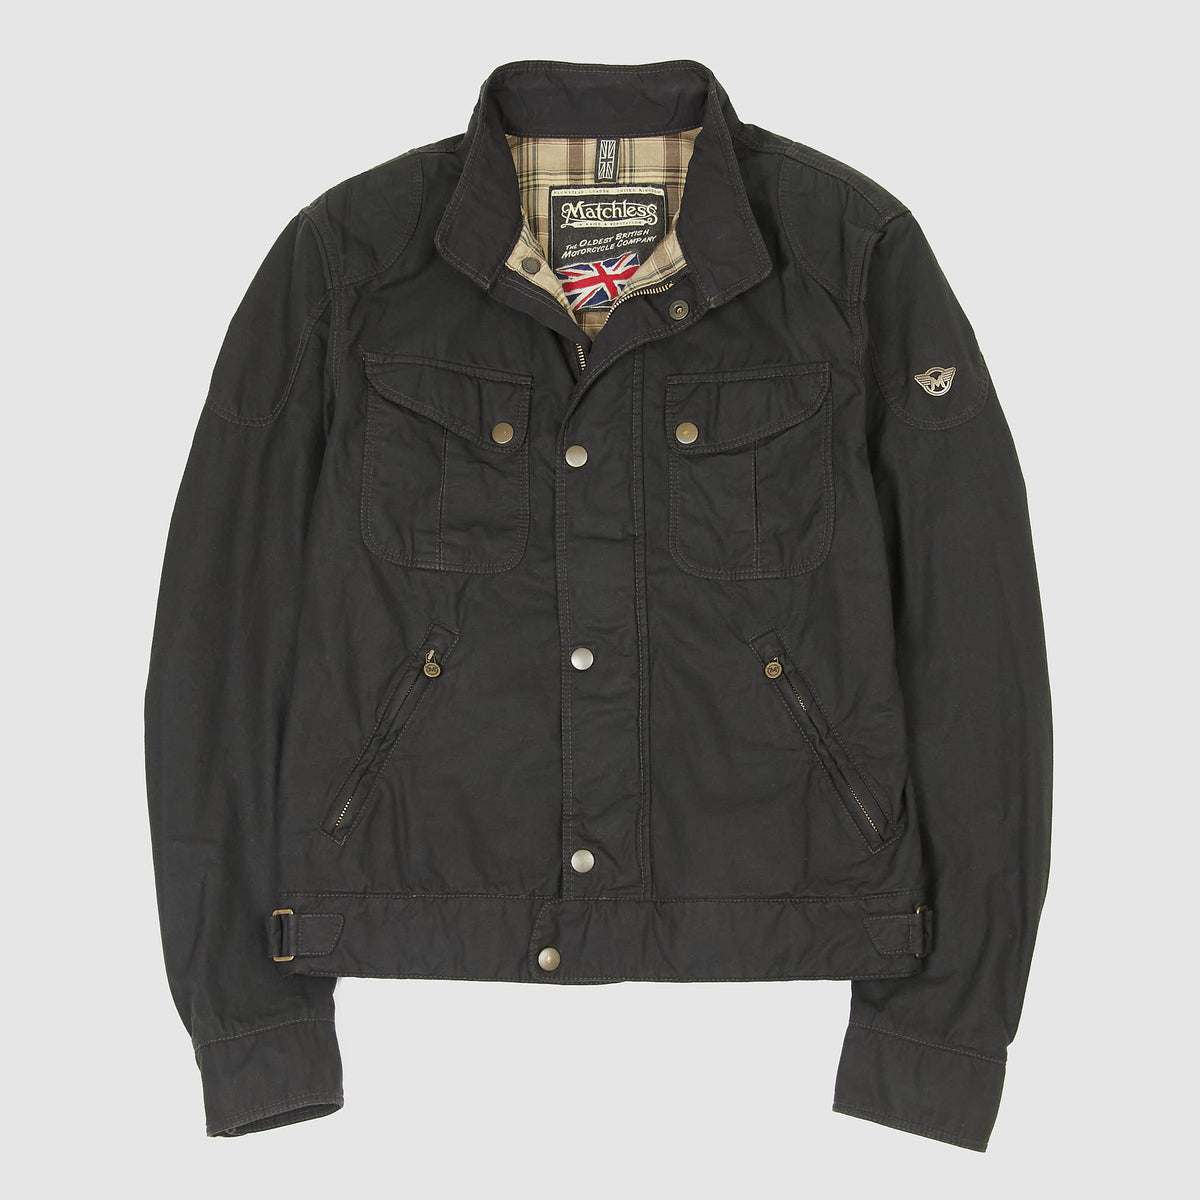 Matchless Road Driver Wax-Jacket